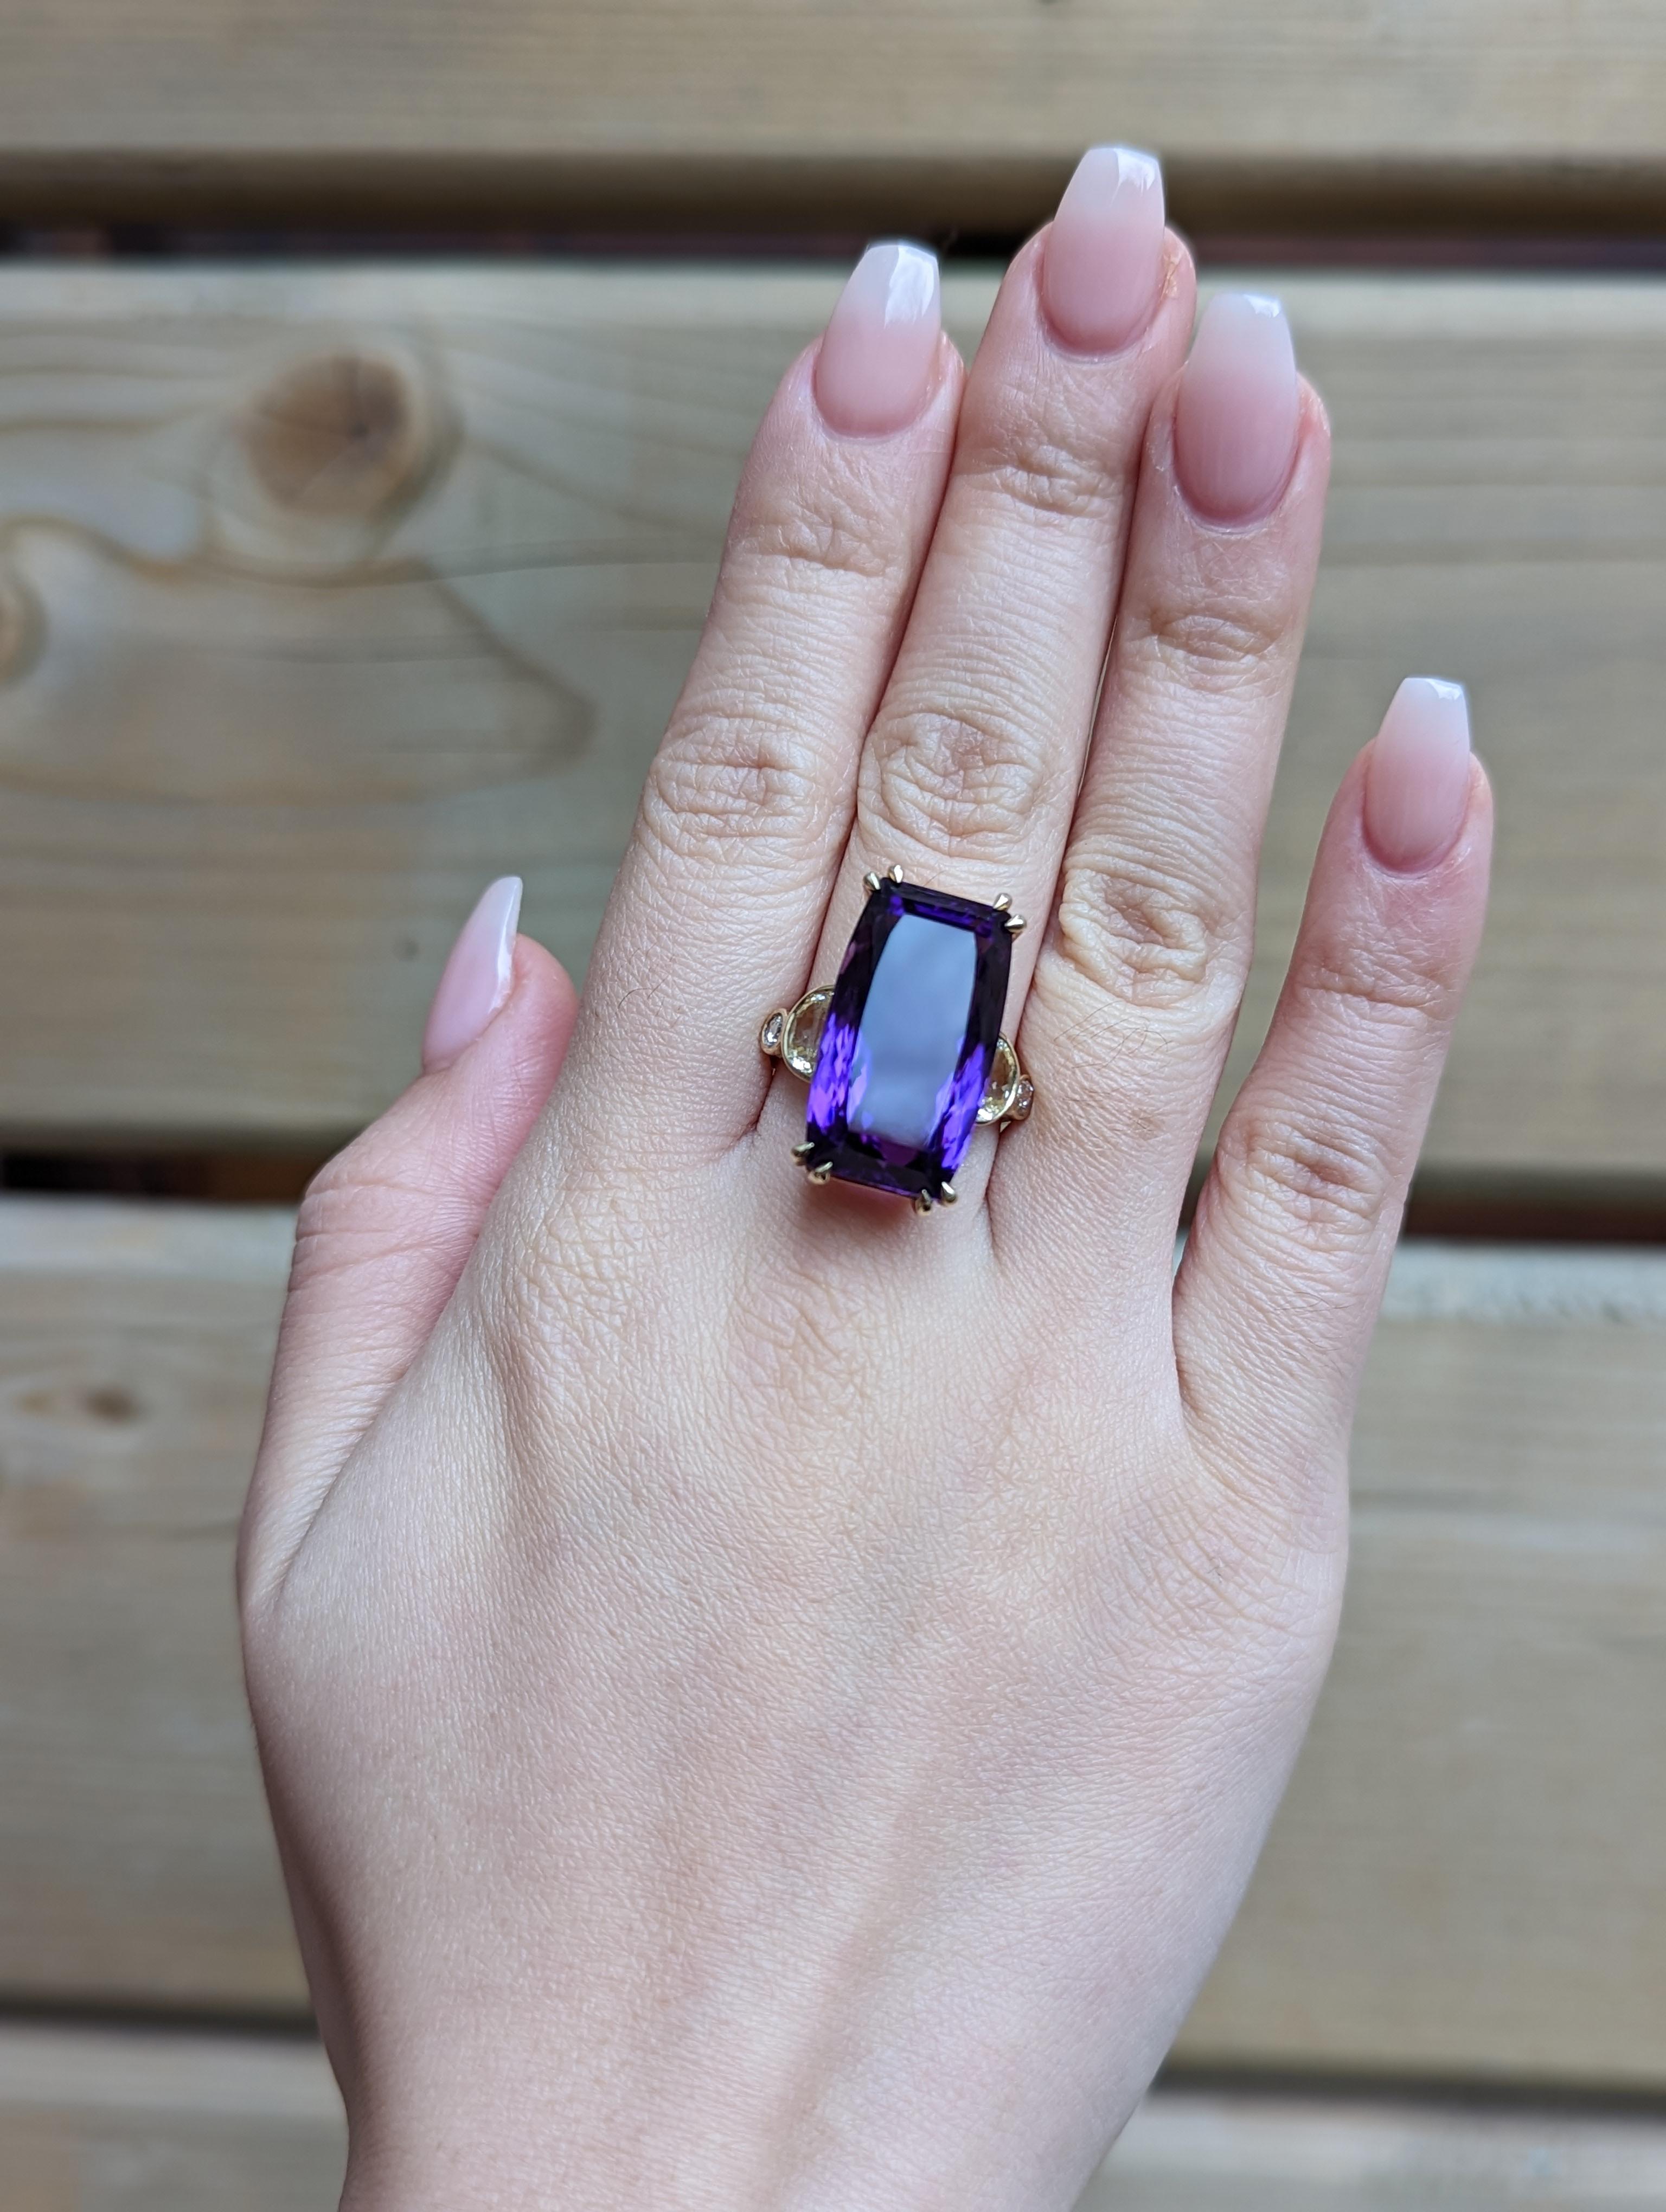 This is a stunning Amethyst, set in 14kt Yellow Gold Ring, with Yellow Sapphires and Rose Cut Diamond side stones. This ring is made to exacting standards here in Canada.

Description:

Gem Type: Amethyst
Number of Stones: 1
Weight: 20.5